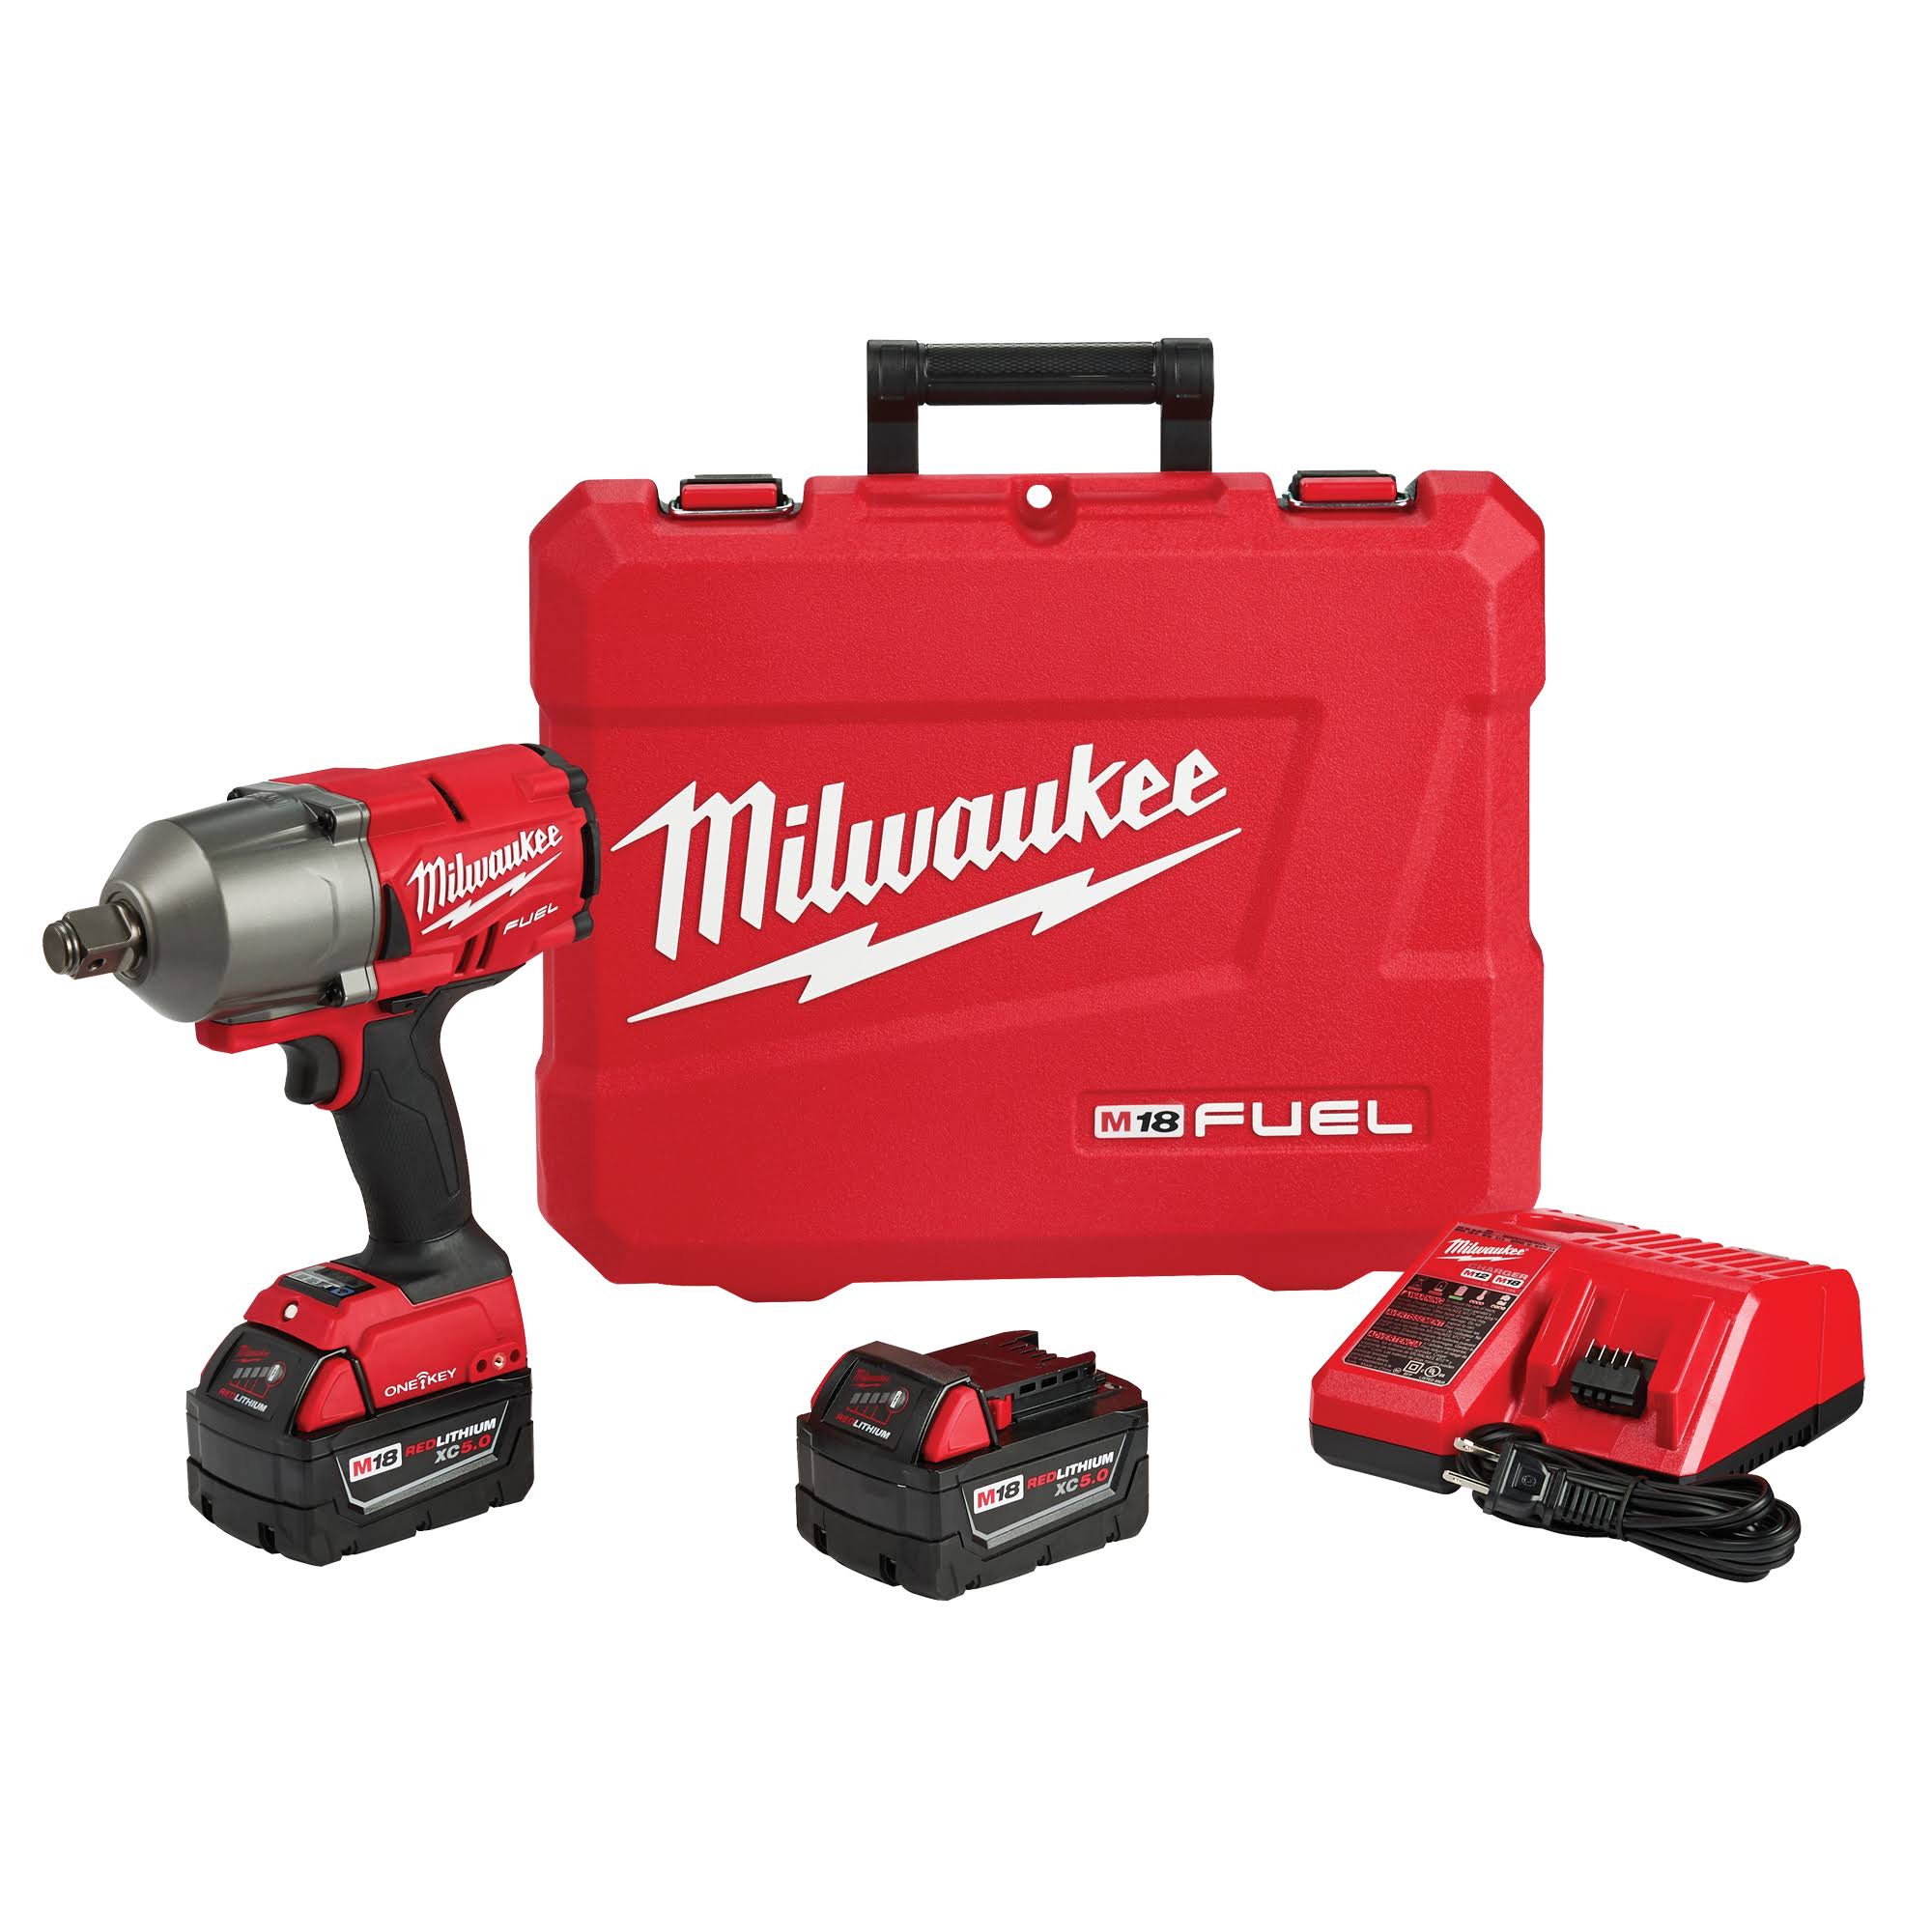 Milwaukee Electric Tool 2864-22 Cordless Impact Wrench Kits - 18.0V, 1500 Foot lbs, Max. Torque, Battery